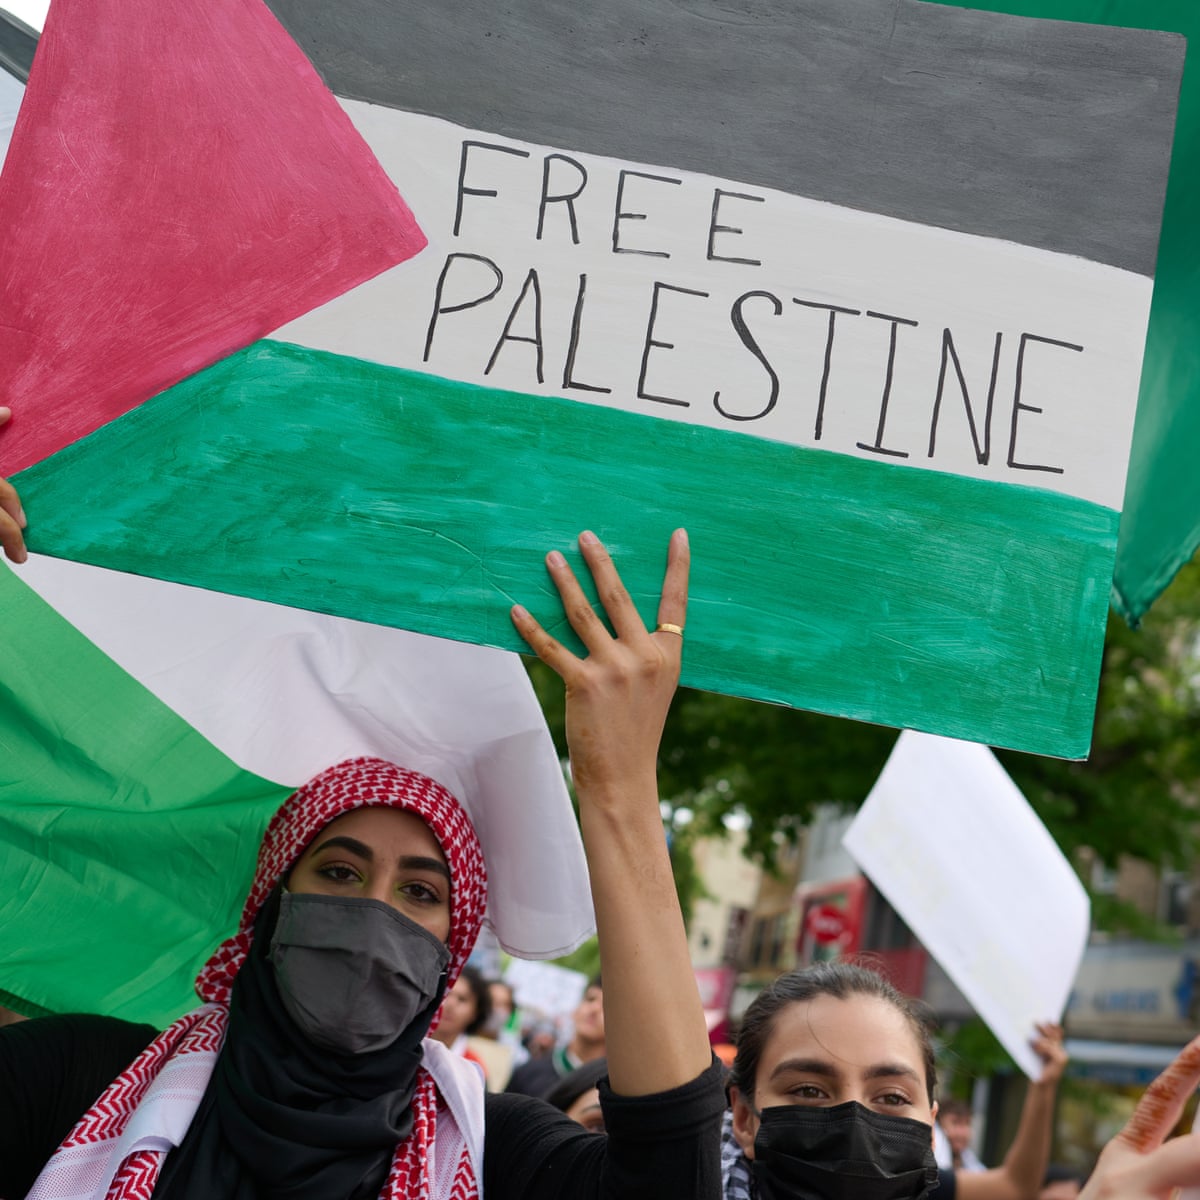 Facebook under fire as human rights groups claim 'censorship' of pro- Palestine posts | Social media | The Guardian